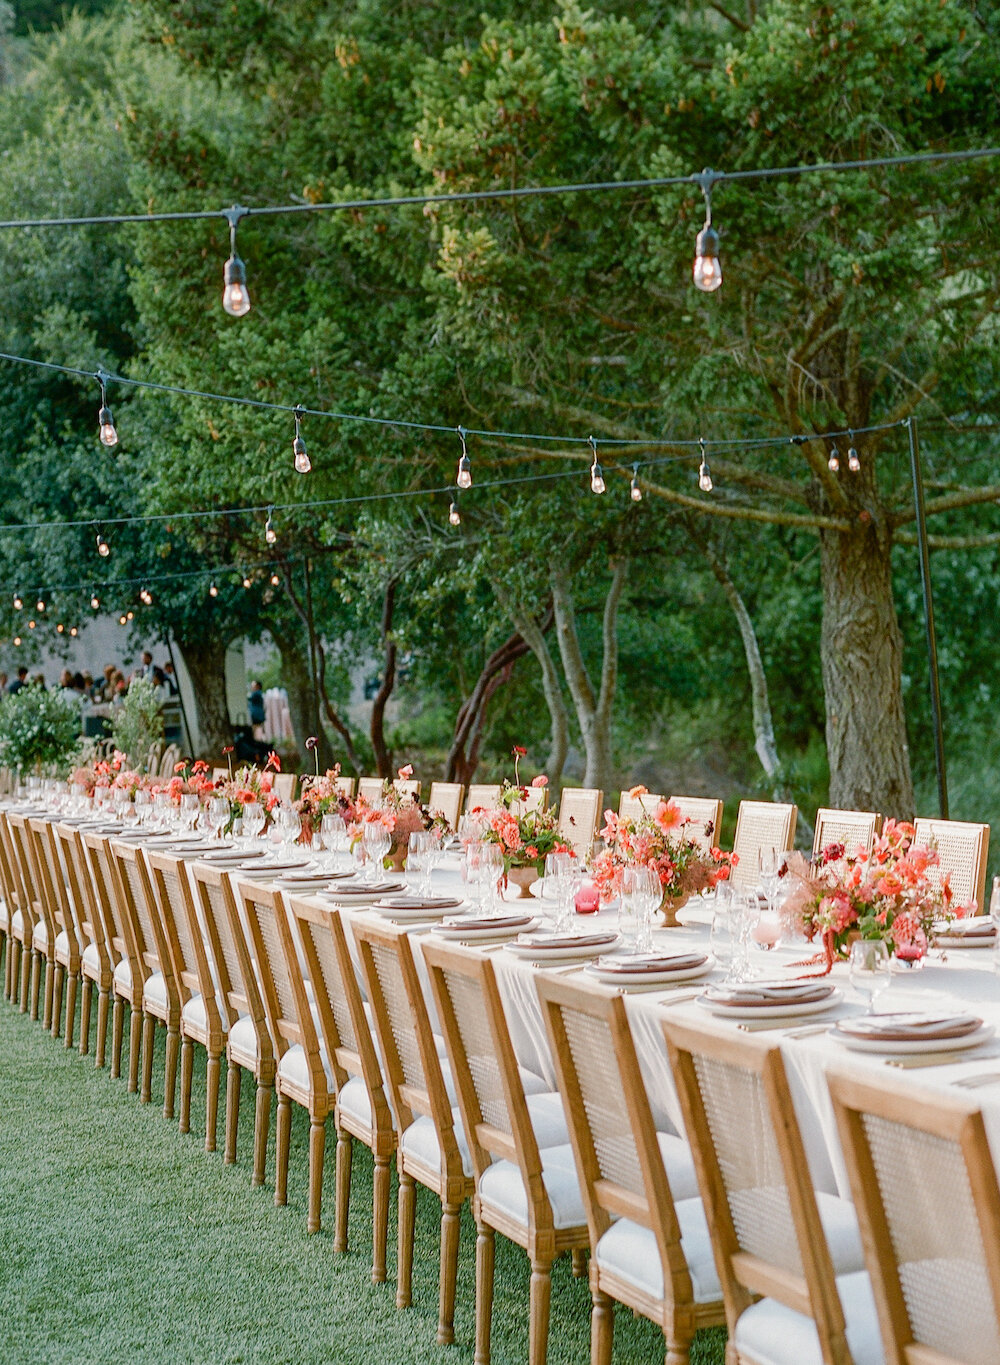  The most magical table, one infinite runway of flowers and a feast, surrounded on all sides by your nearest and dearest.   Photo by Rebecca Yale. Event Design by Callista &amp; Co. As seen on Martha Stewart Weddings. 